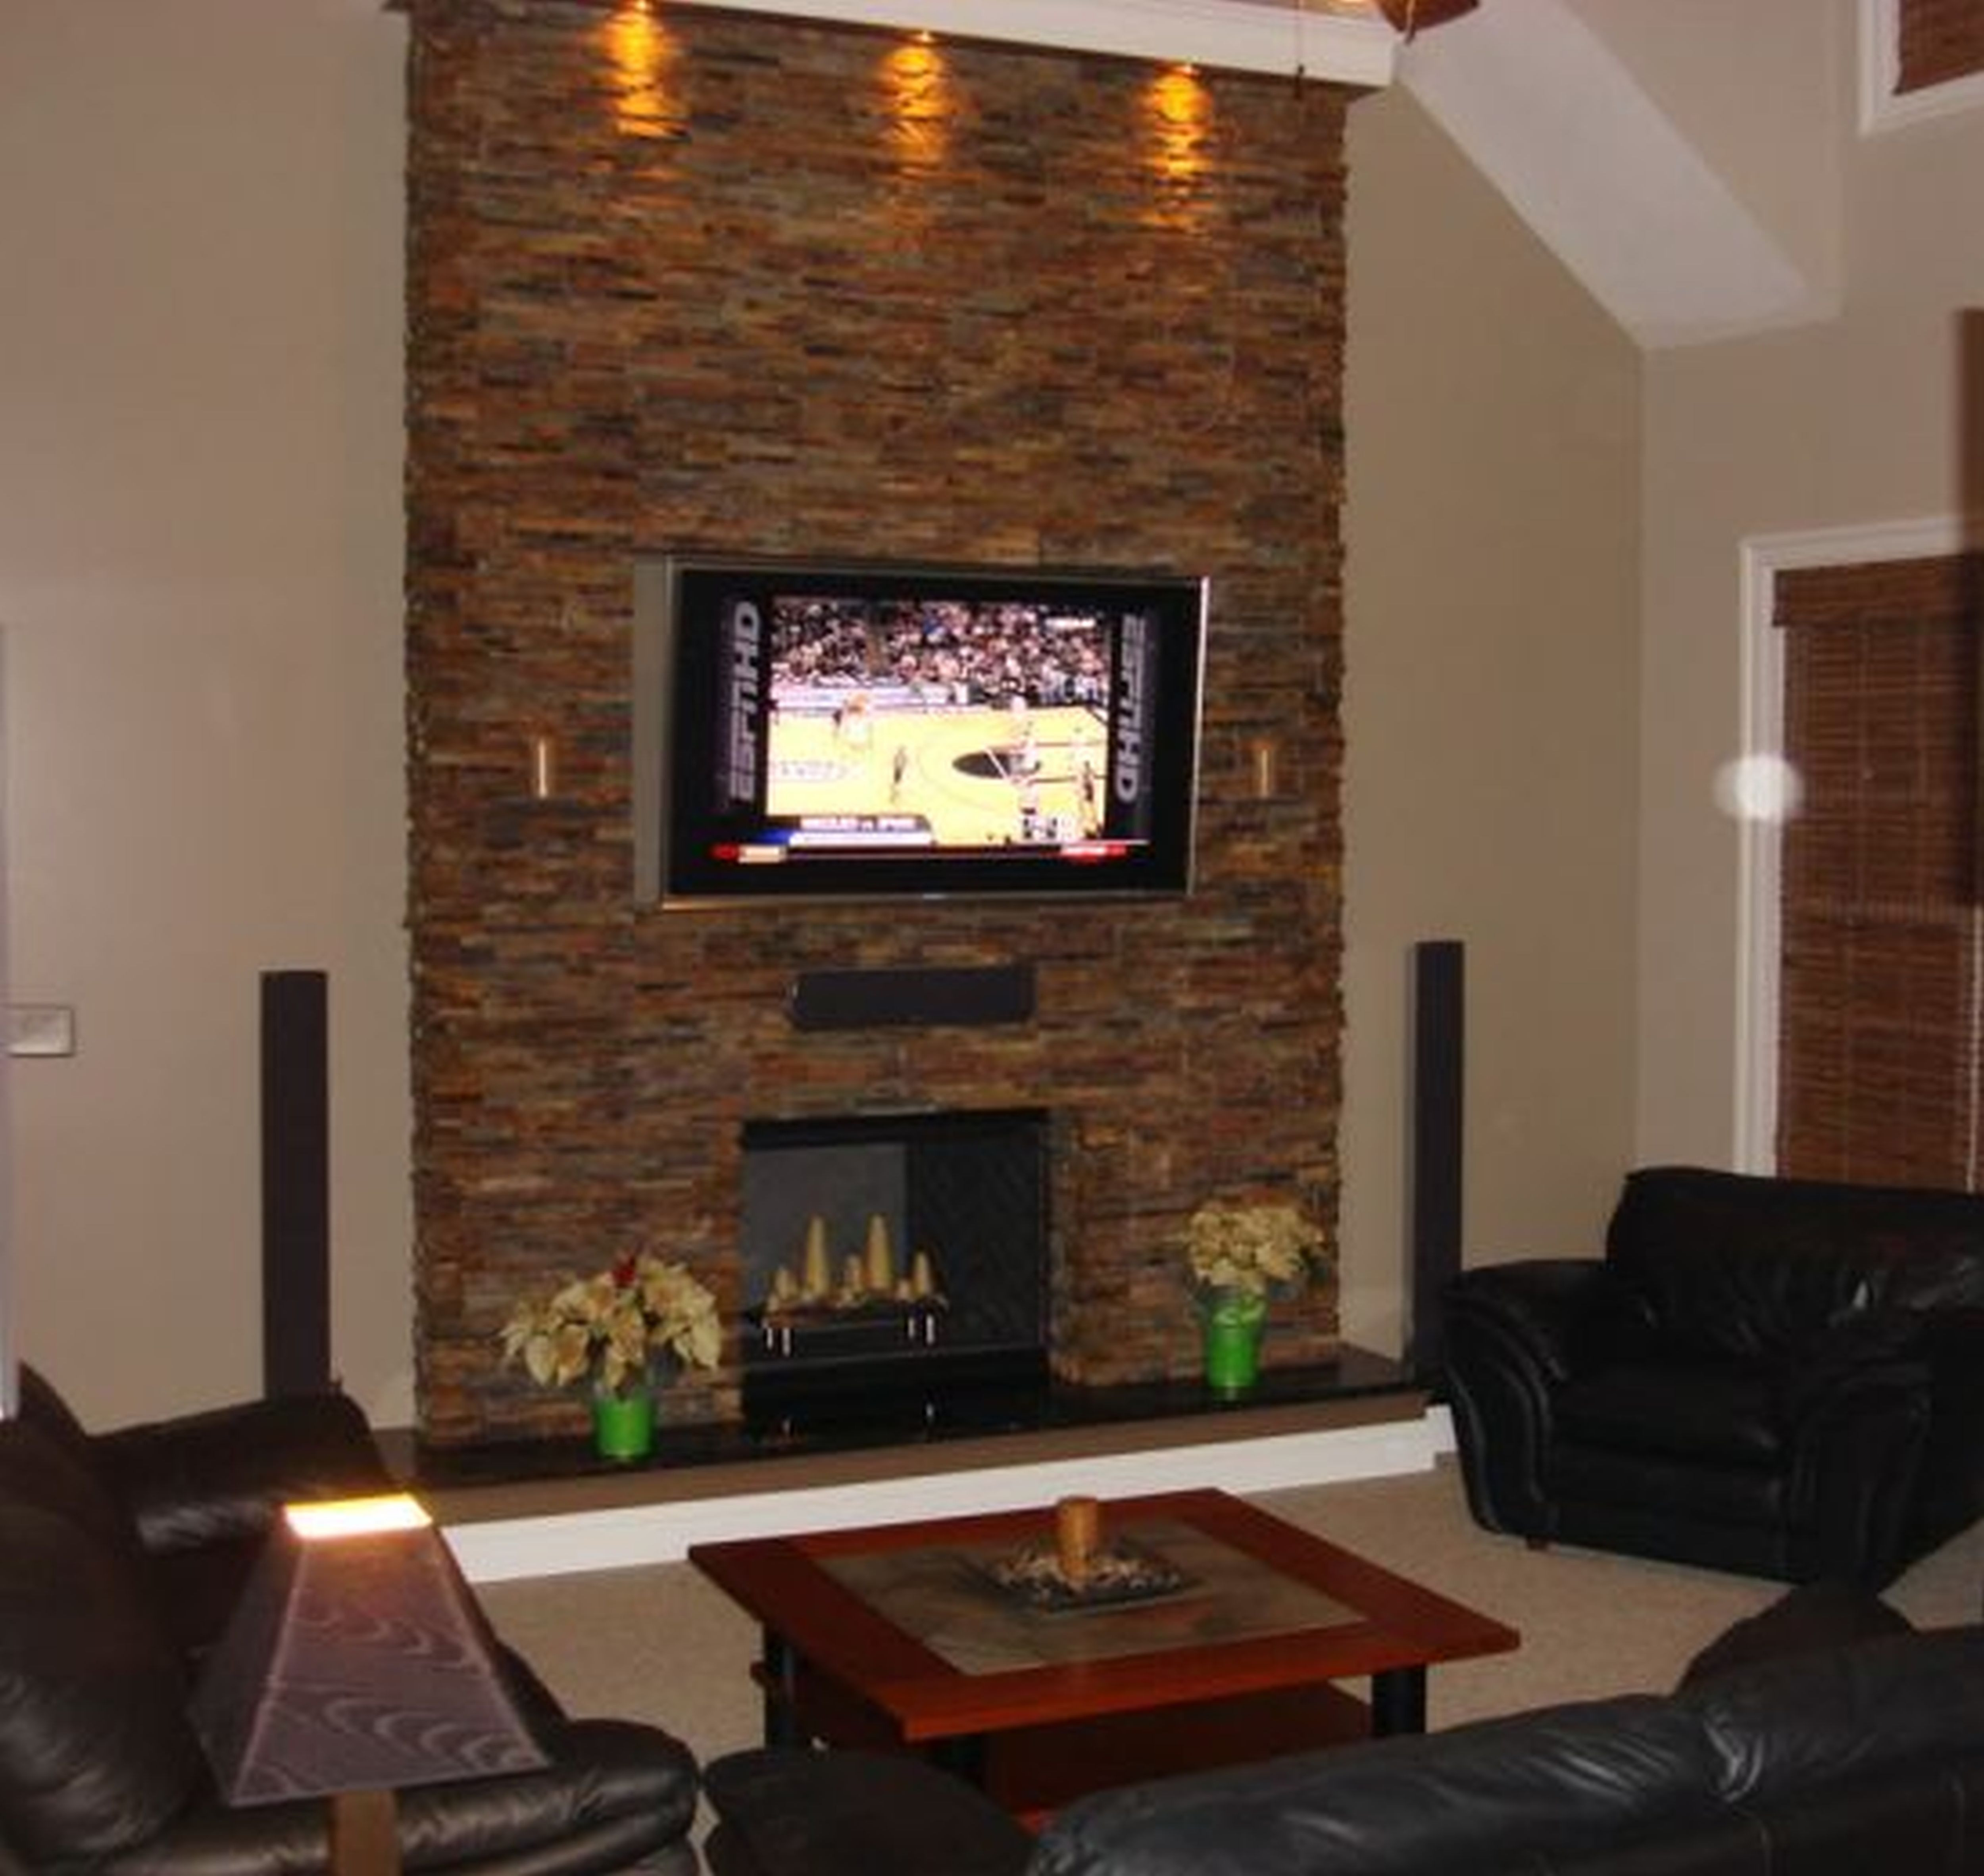 Fireplace Feature Wall Luxury Feature Wall Ideas Living Room with Fireplace